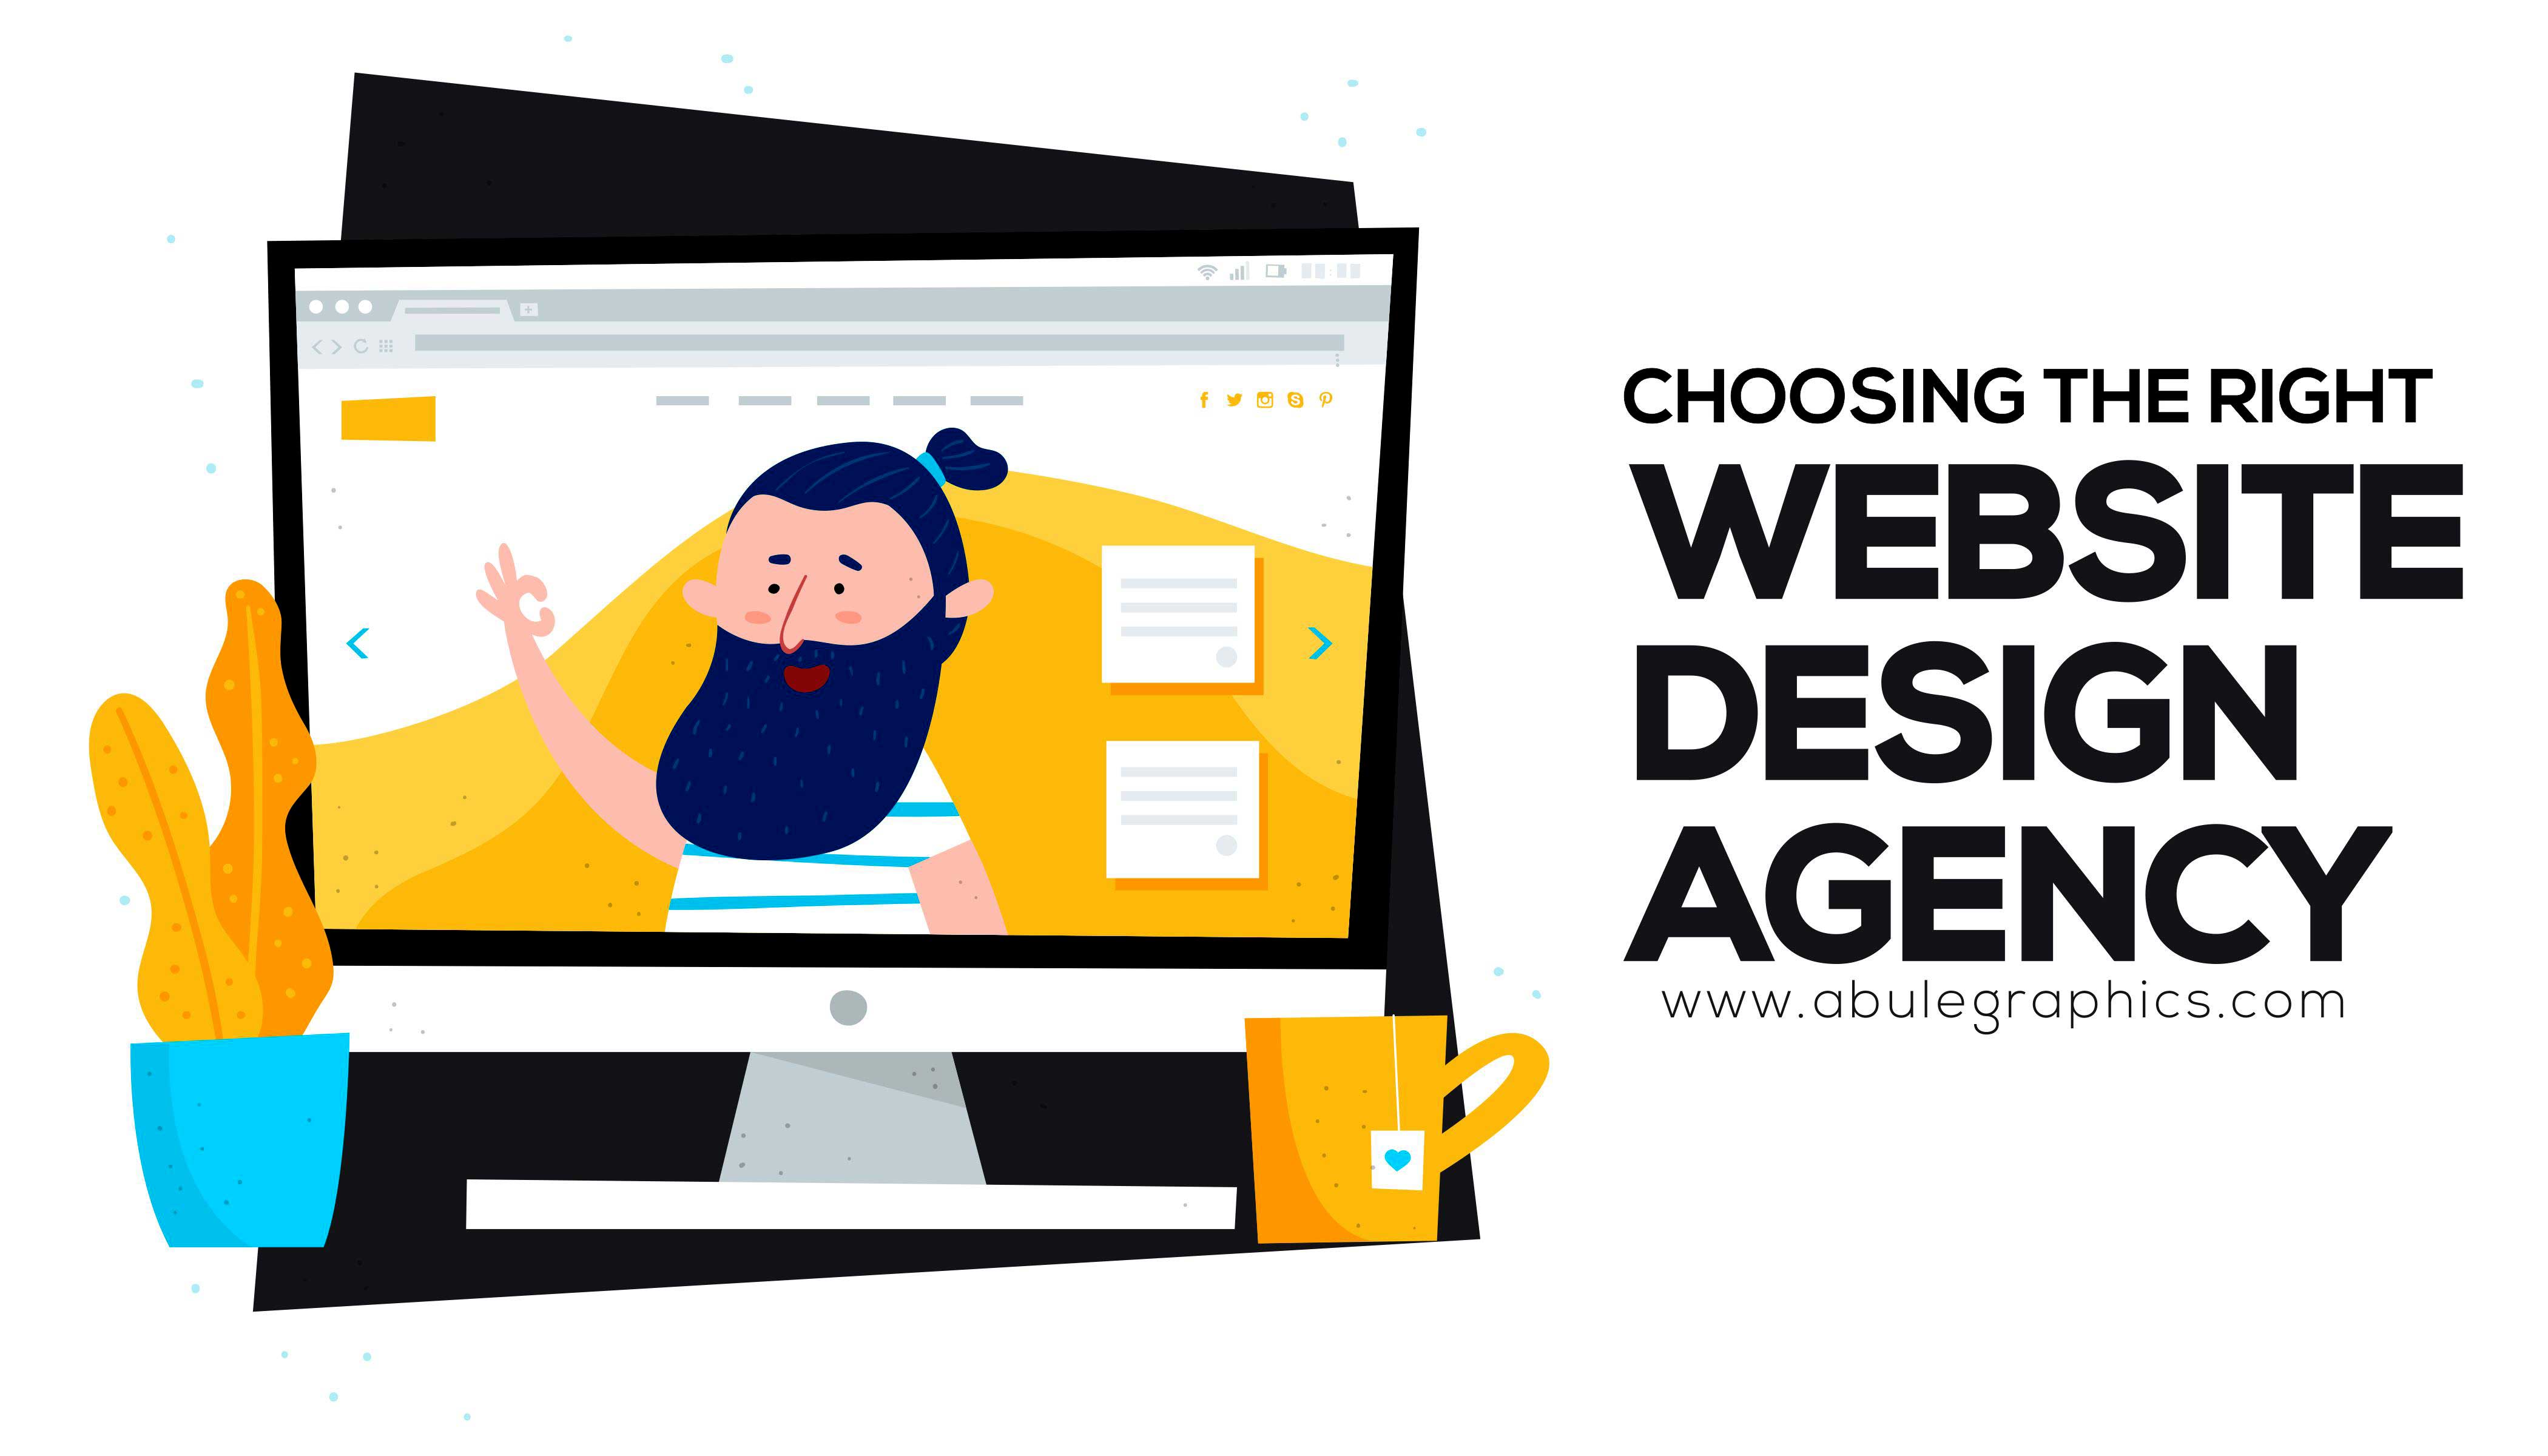 HOW TO CHOOSE THE RIGHT WEBSITE DESIGN AGENCY – TOP TIPS